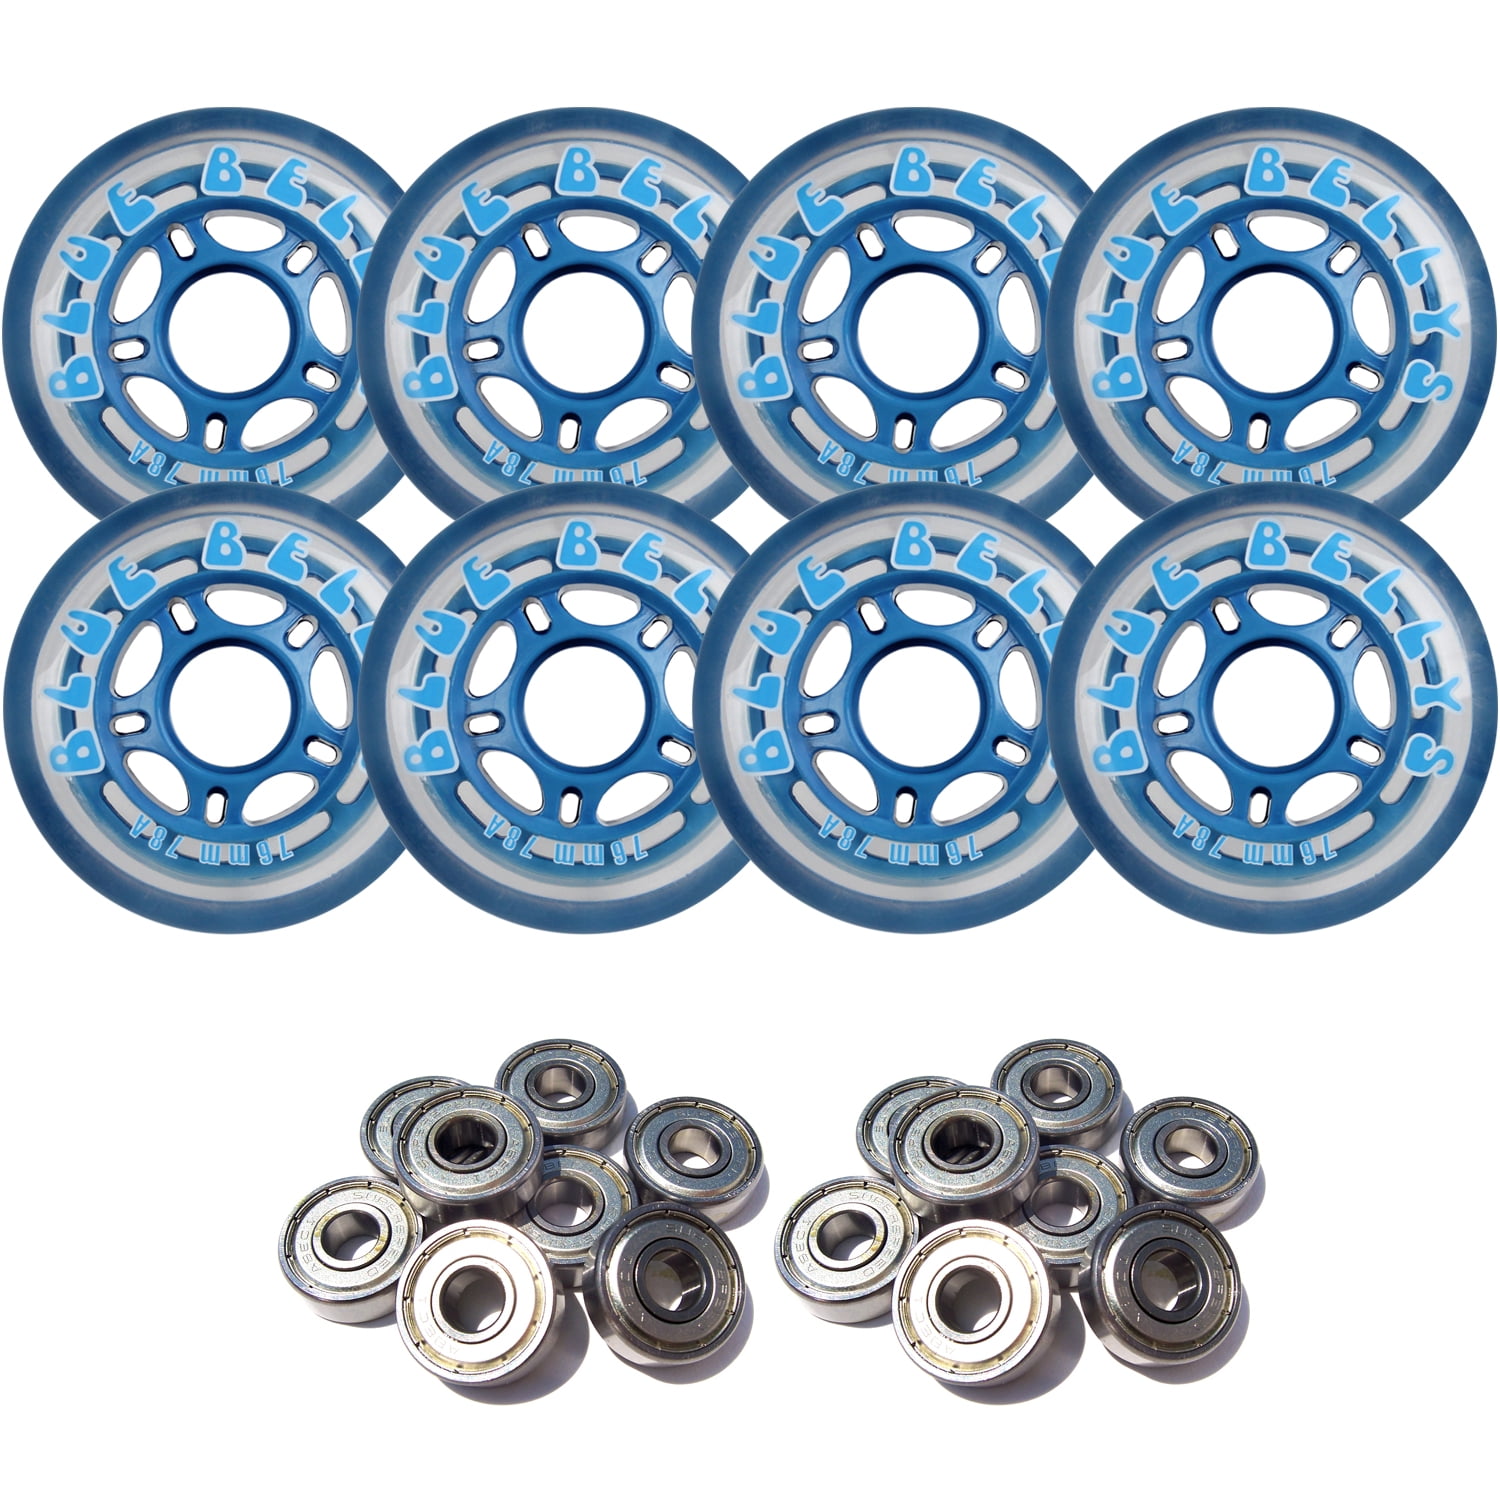 Details about   Bull Z Eye 4 Replacement Blue In Line Skate Wheels Brand New 